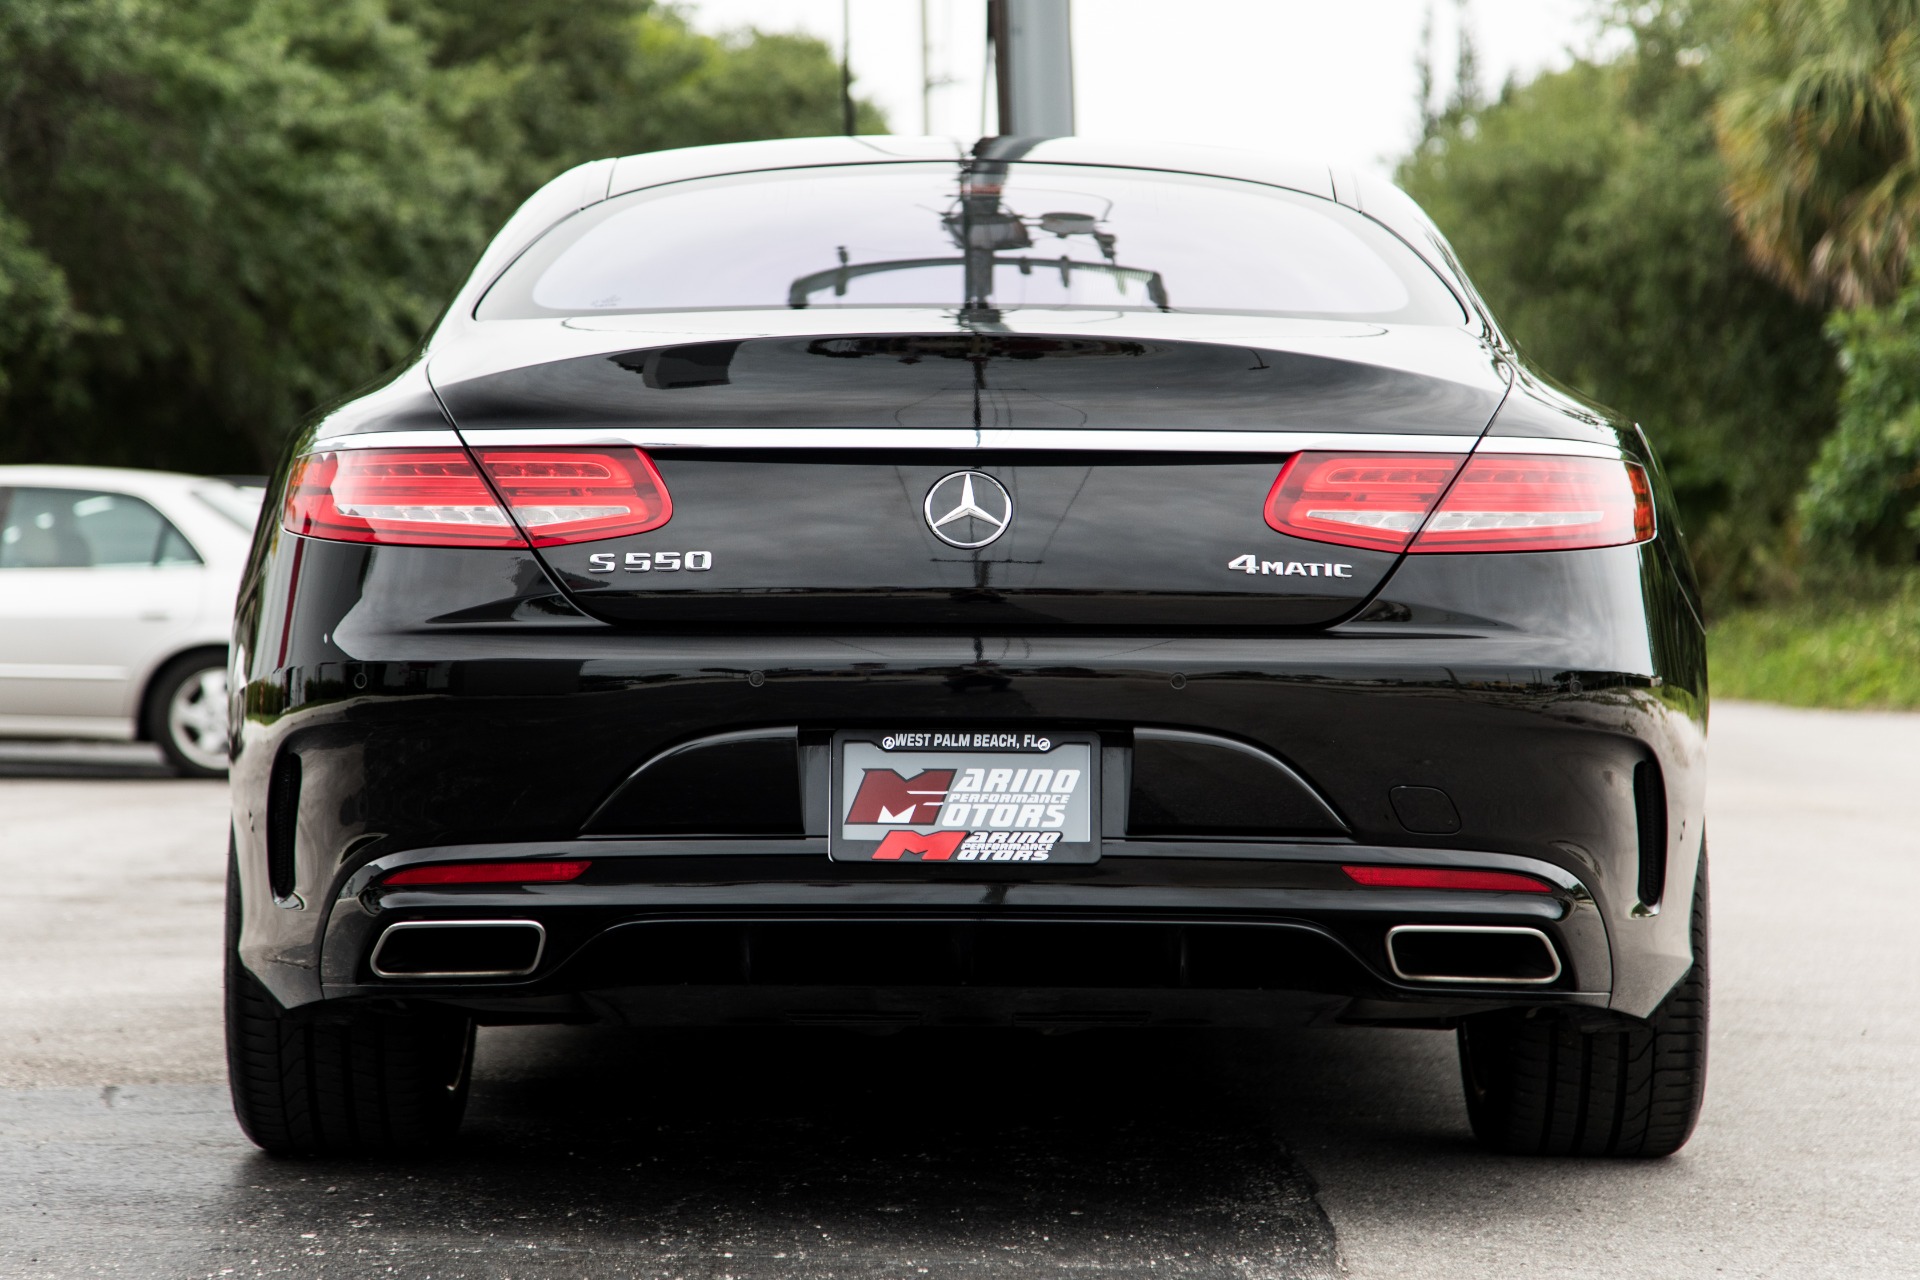 Used 2015 Mercedes-Benz S-Class S 550 4MATIC For Sale ($67,900) | Marino Performance Motors ...